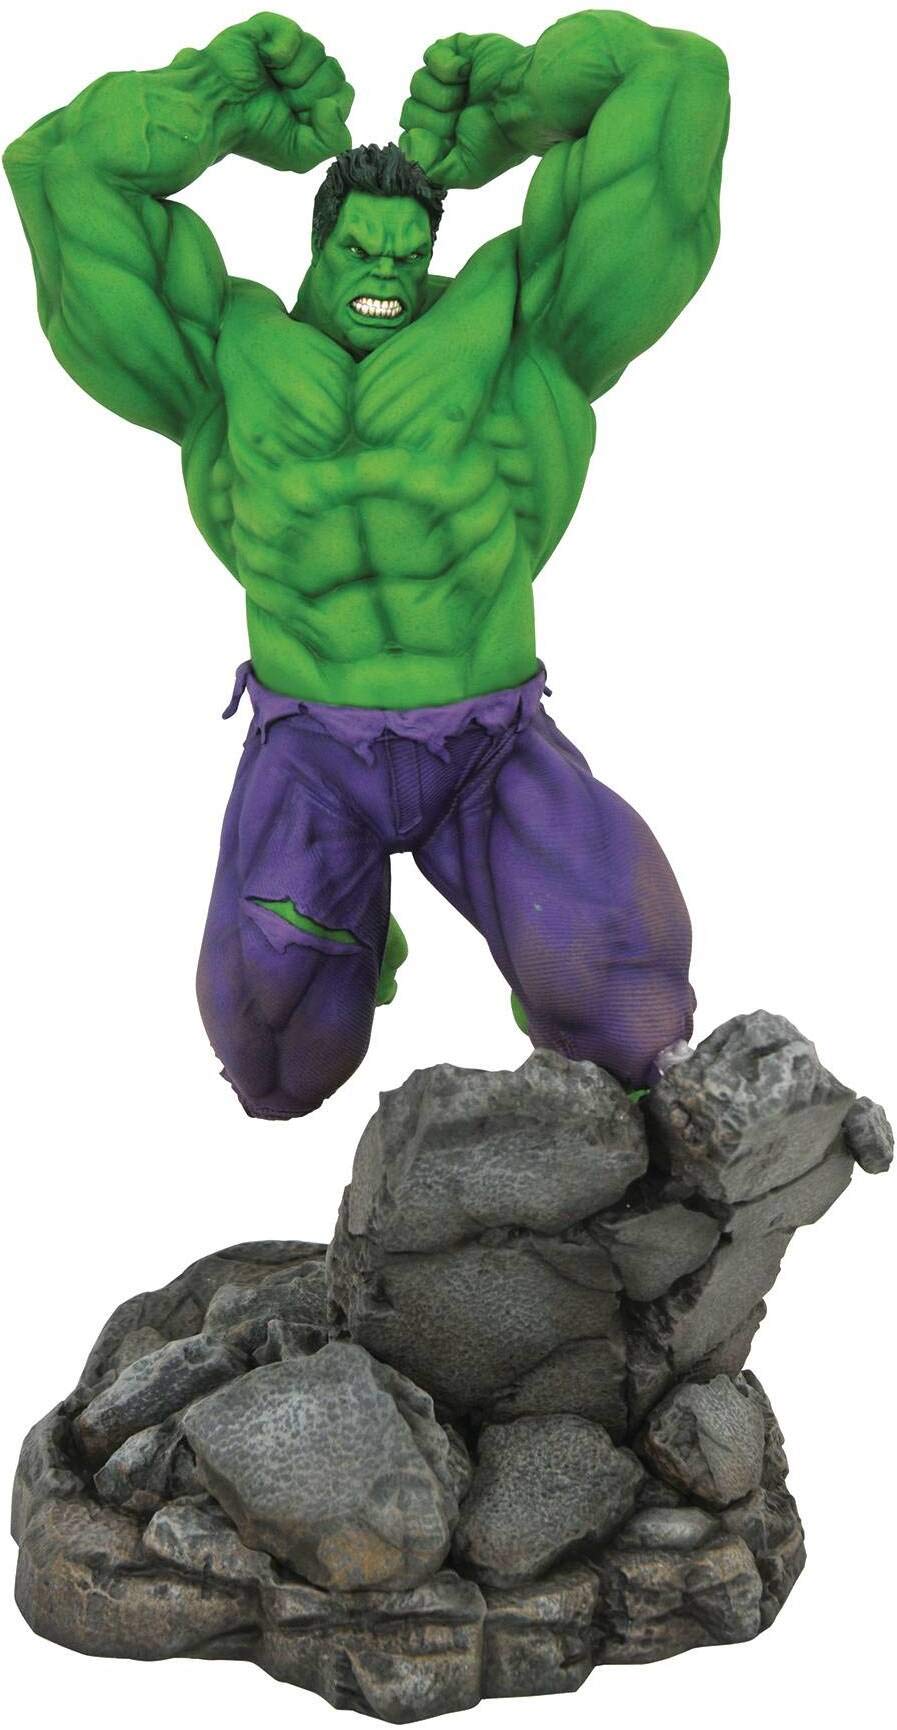 Marvel Premier Collection: The Hulk Statue, Multicolor, 17 inches